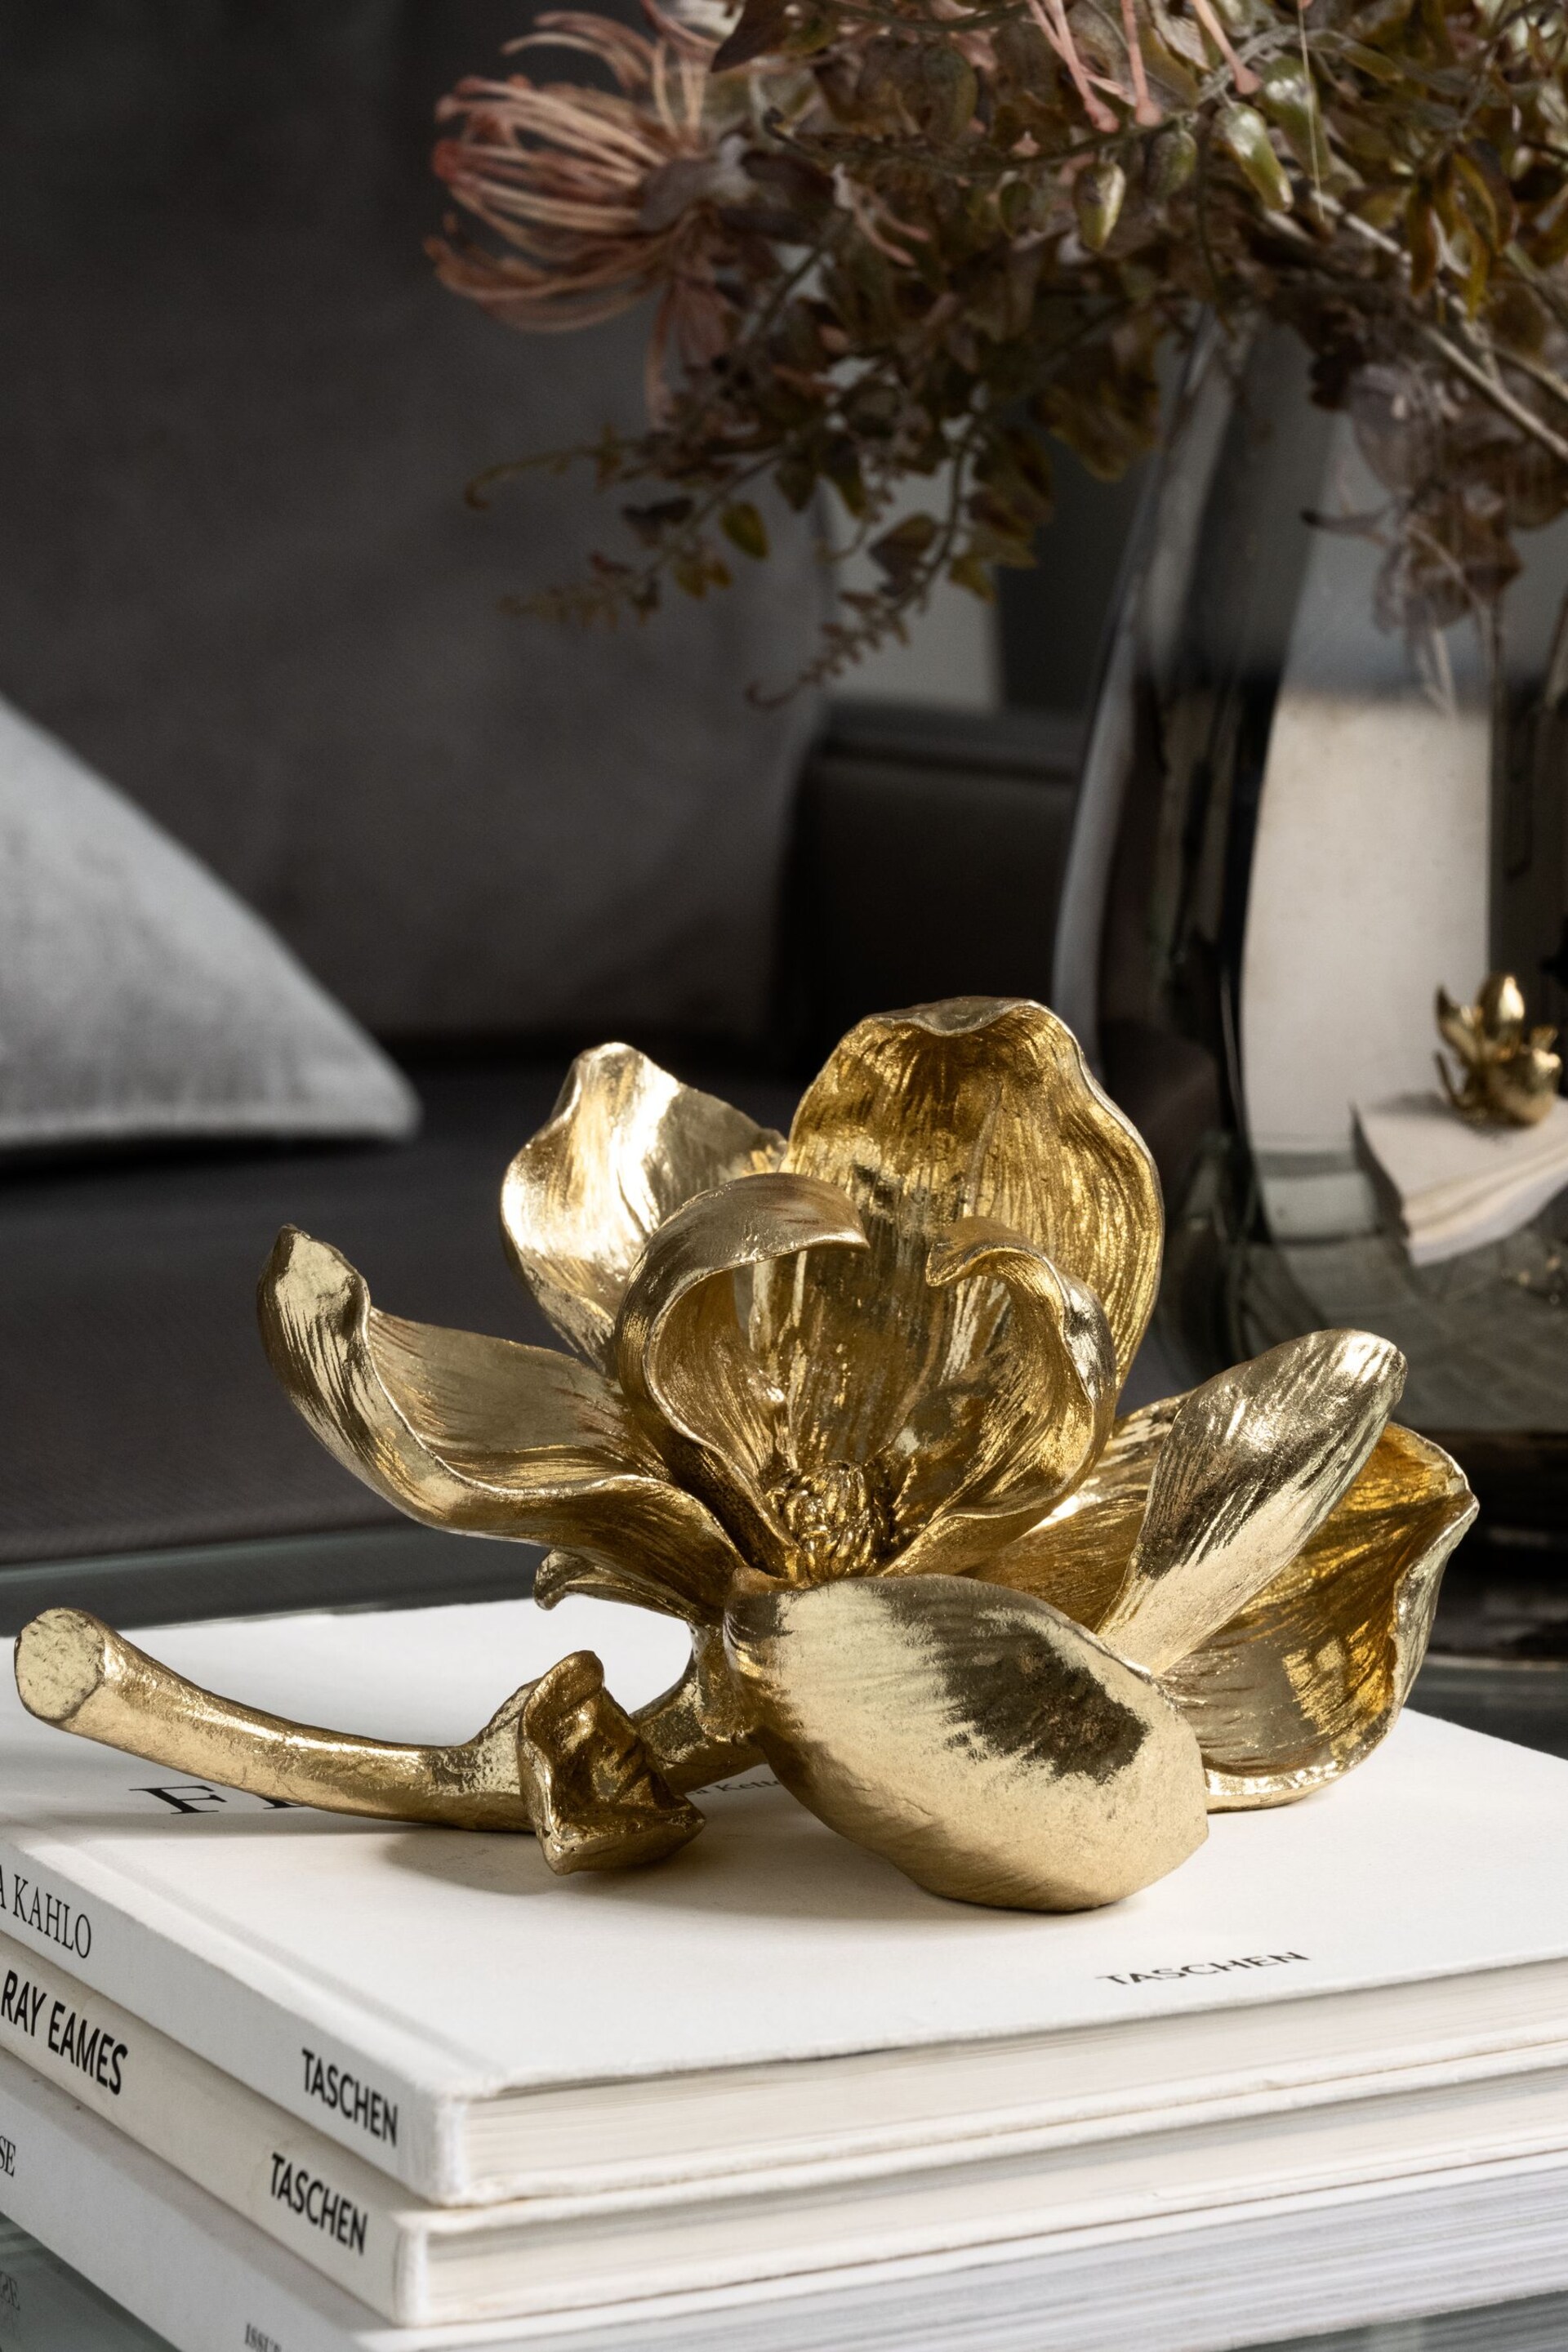 Gold Decorative Flower Ornament - Image 1 of 5